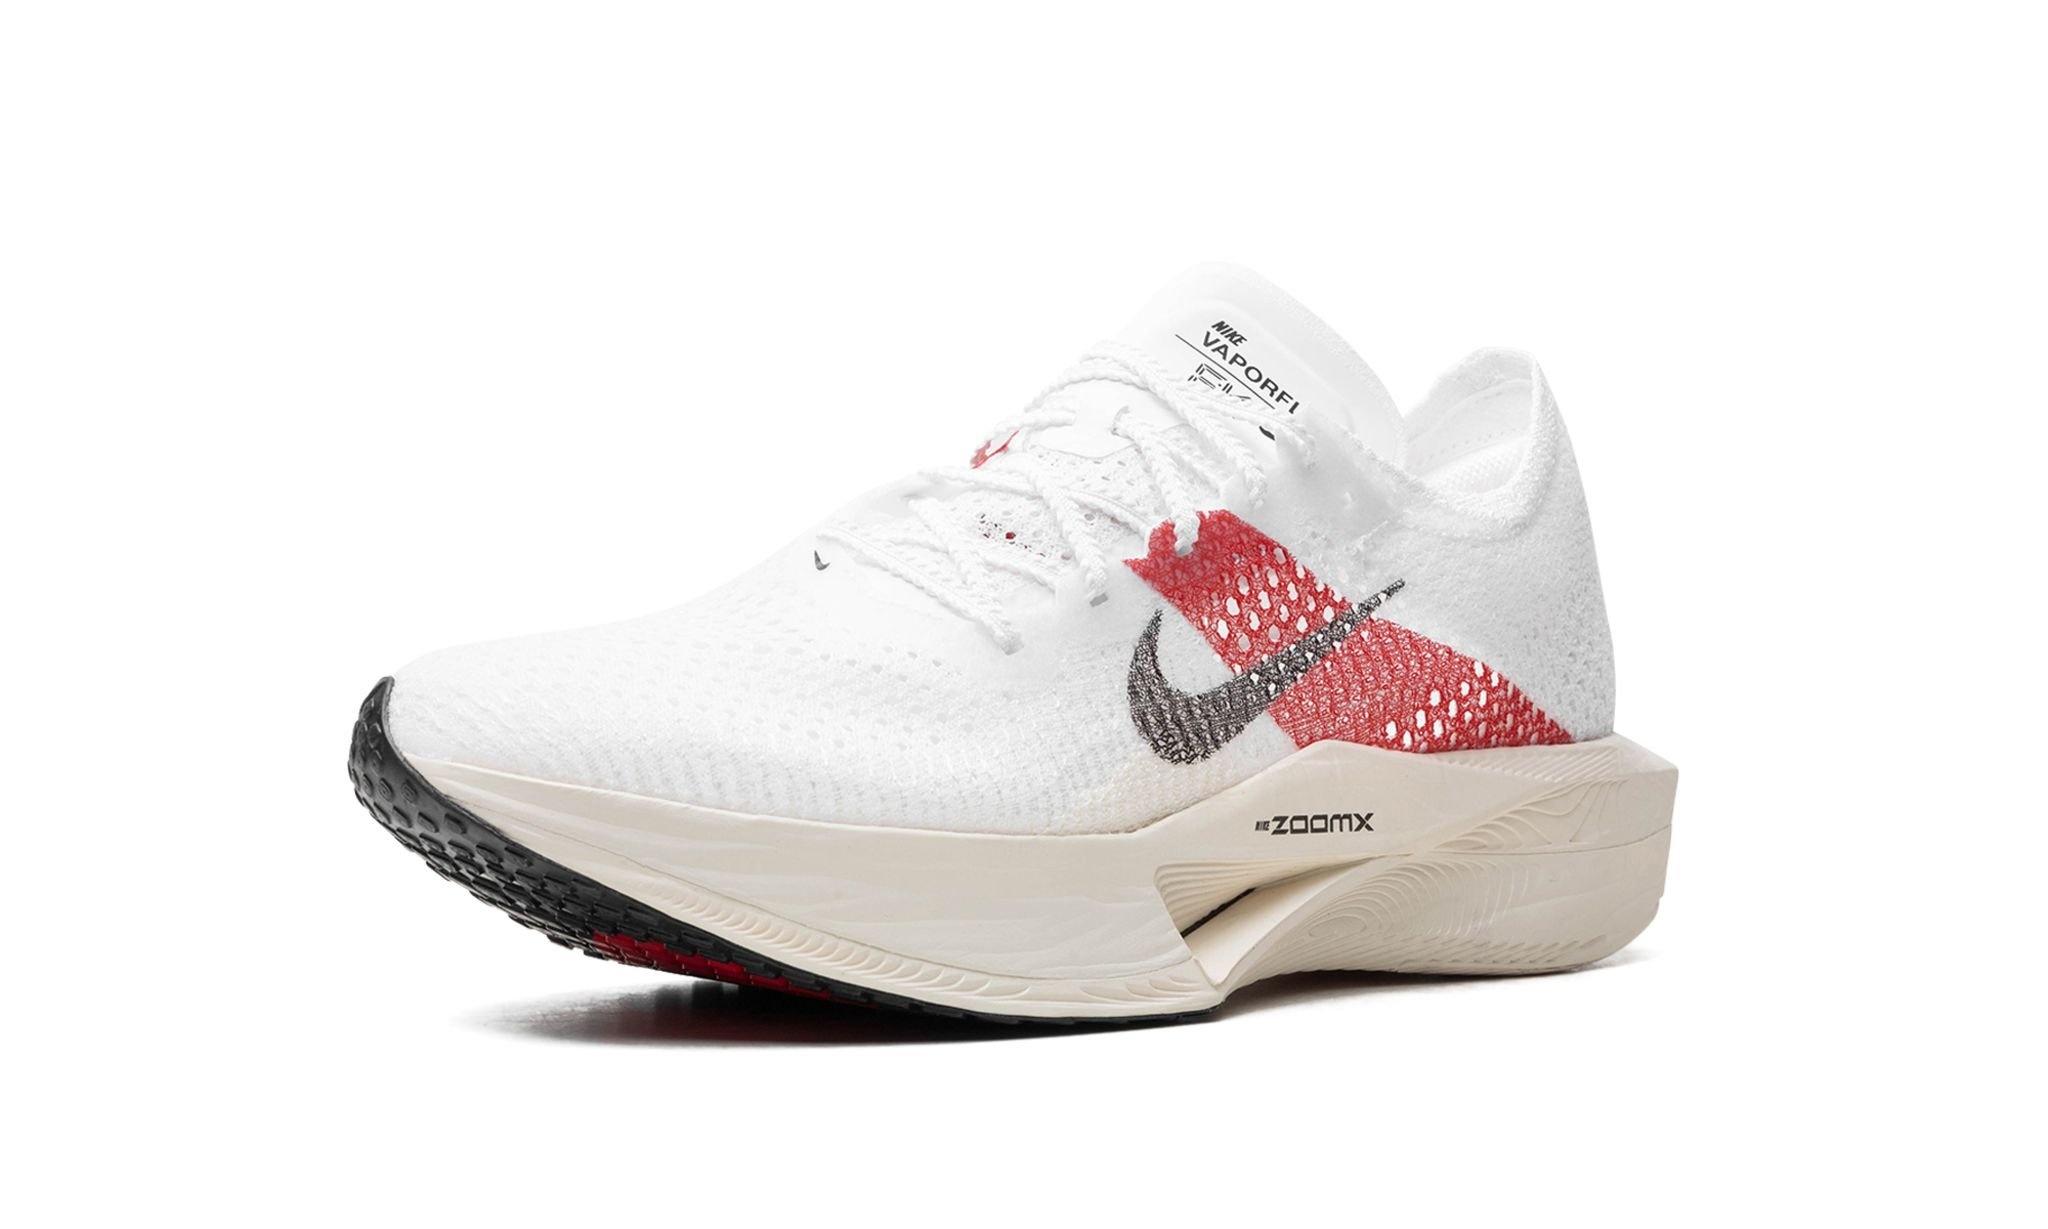 Zoomx Vaporfly Next% 3 EK "Chile Red" - 4